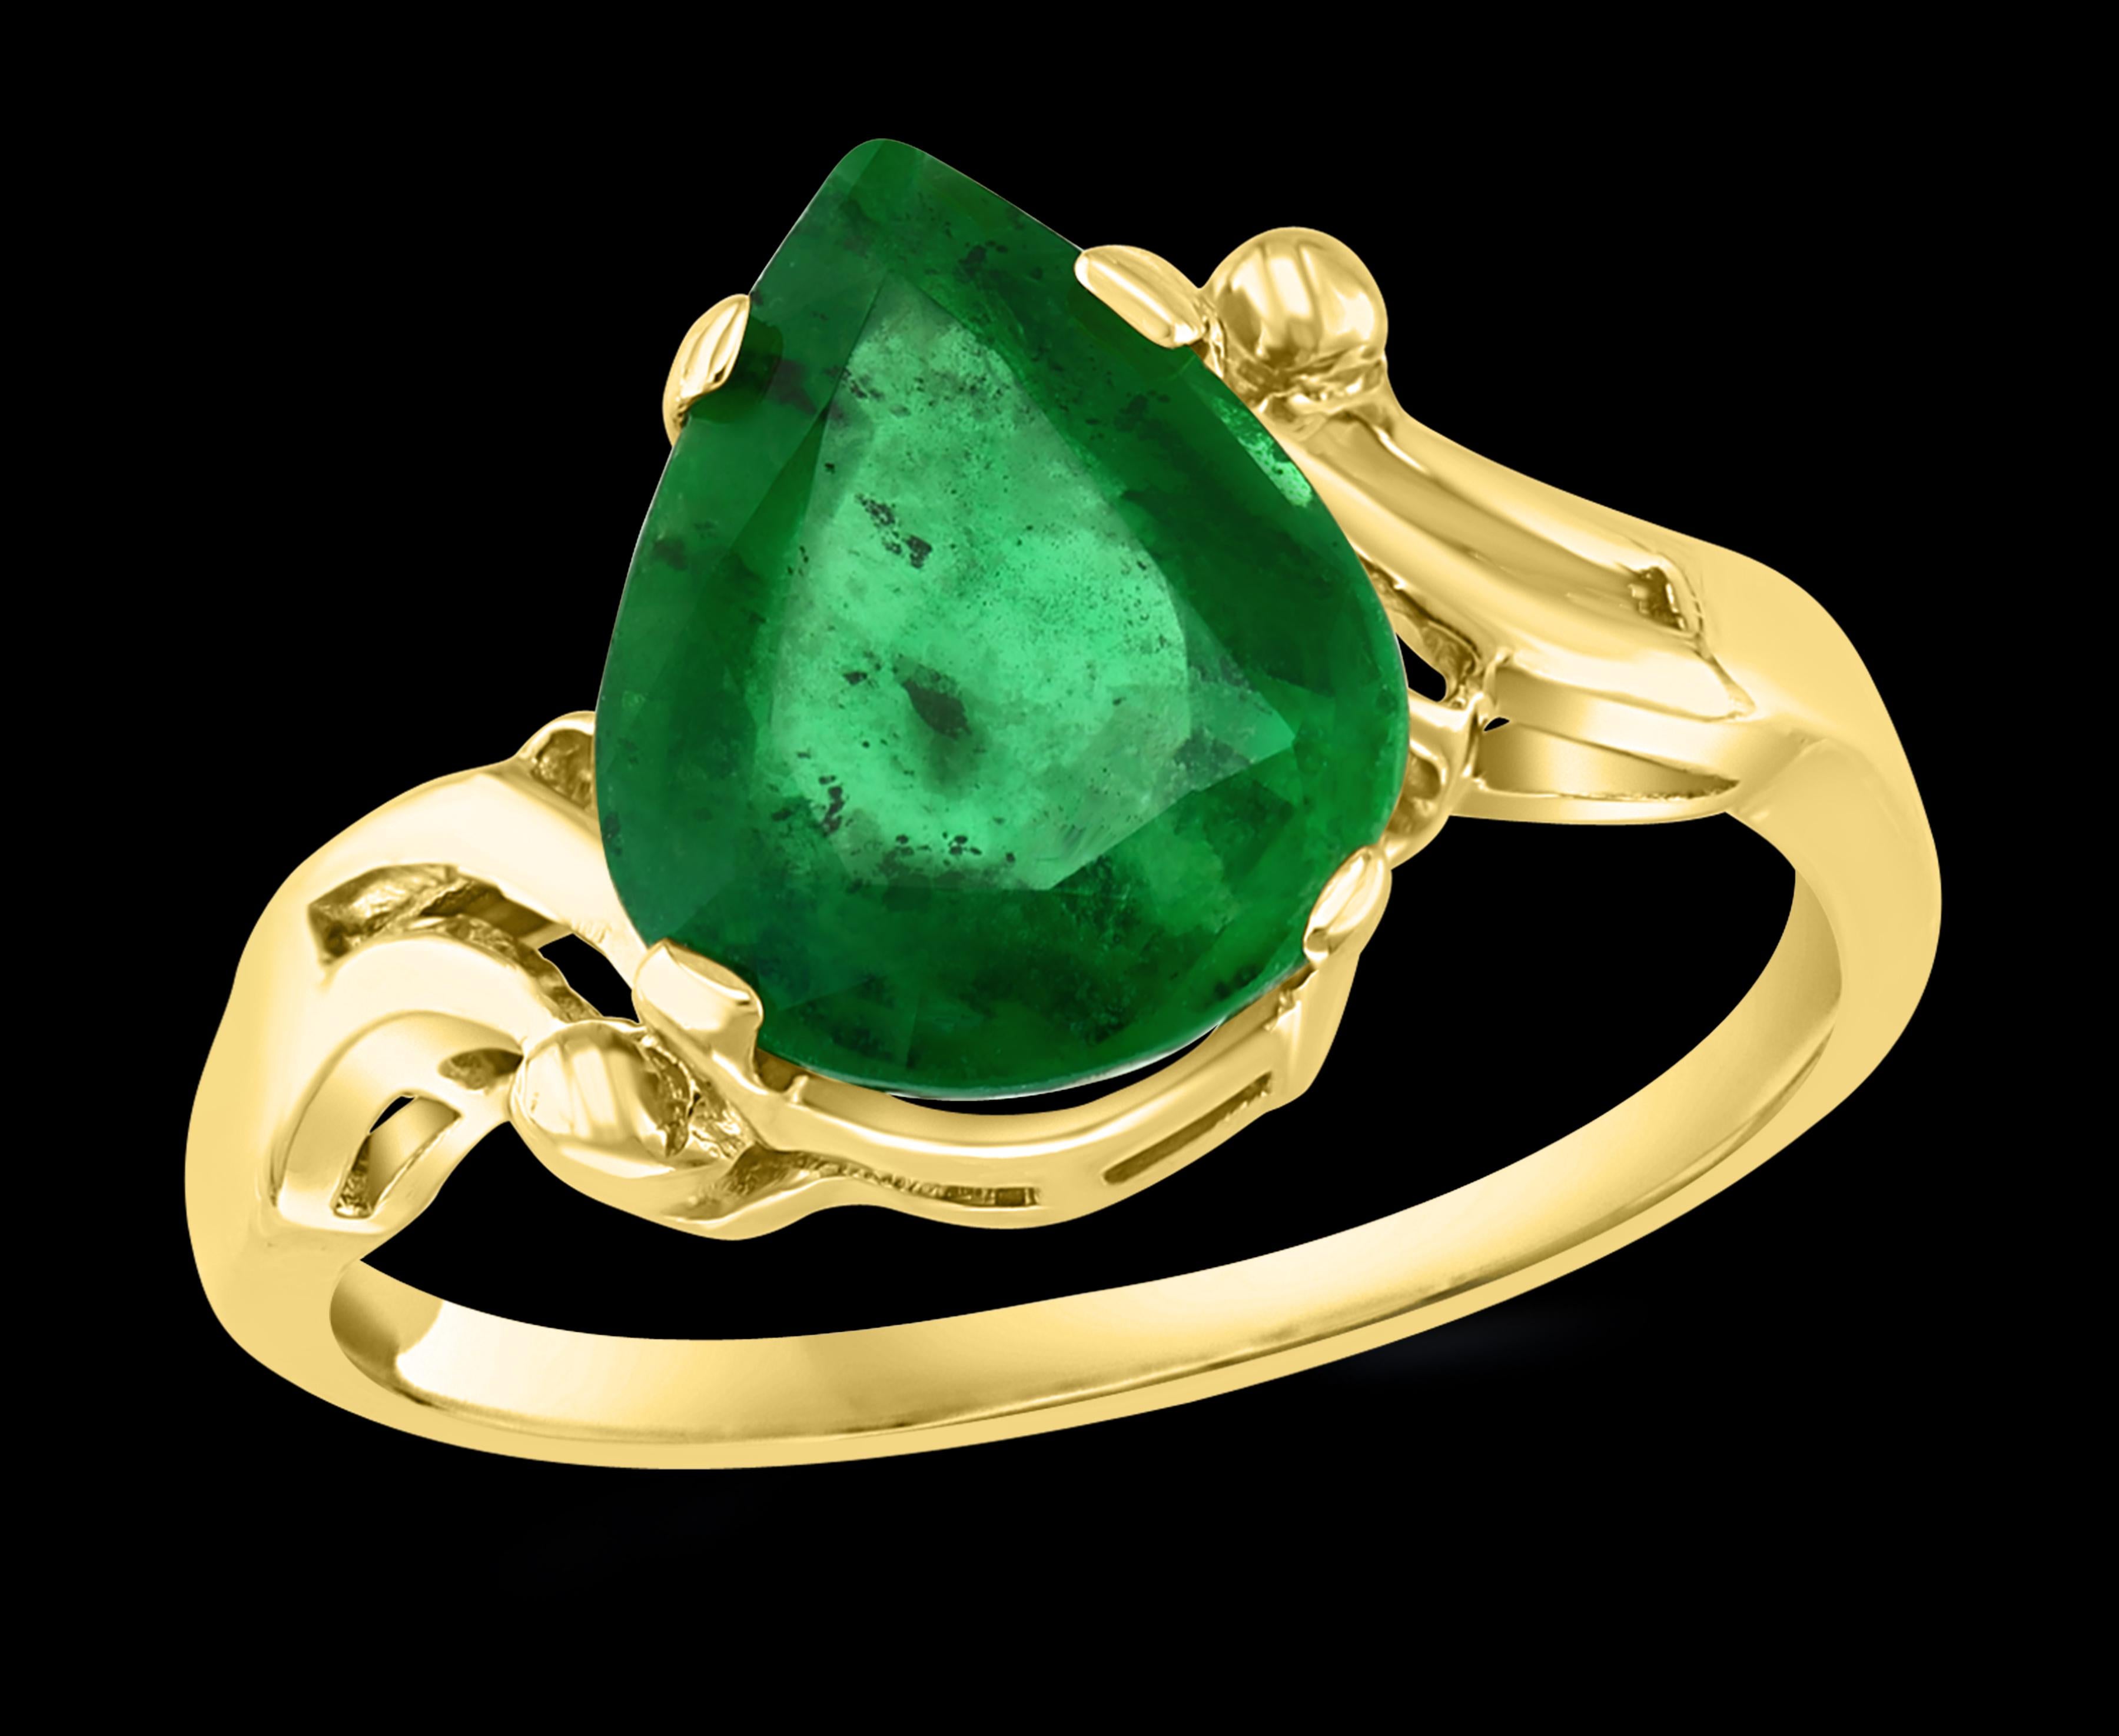 
Approximately 2.8 Carat Pear Cut  Emerald  Ring 14 Karat  Yellow Gold Size 8
Pear shape  Emerald Ring
 Emeralds are very precious , Very Difficult to find and getting more more difficult to find.
A classic, Cocktail ring 
 Emerald measurements 12 X